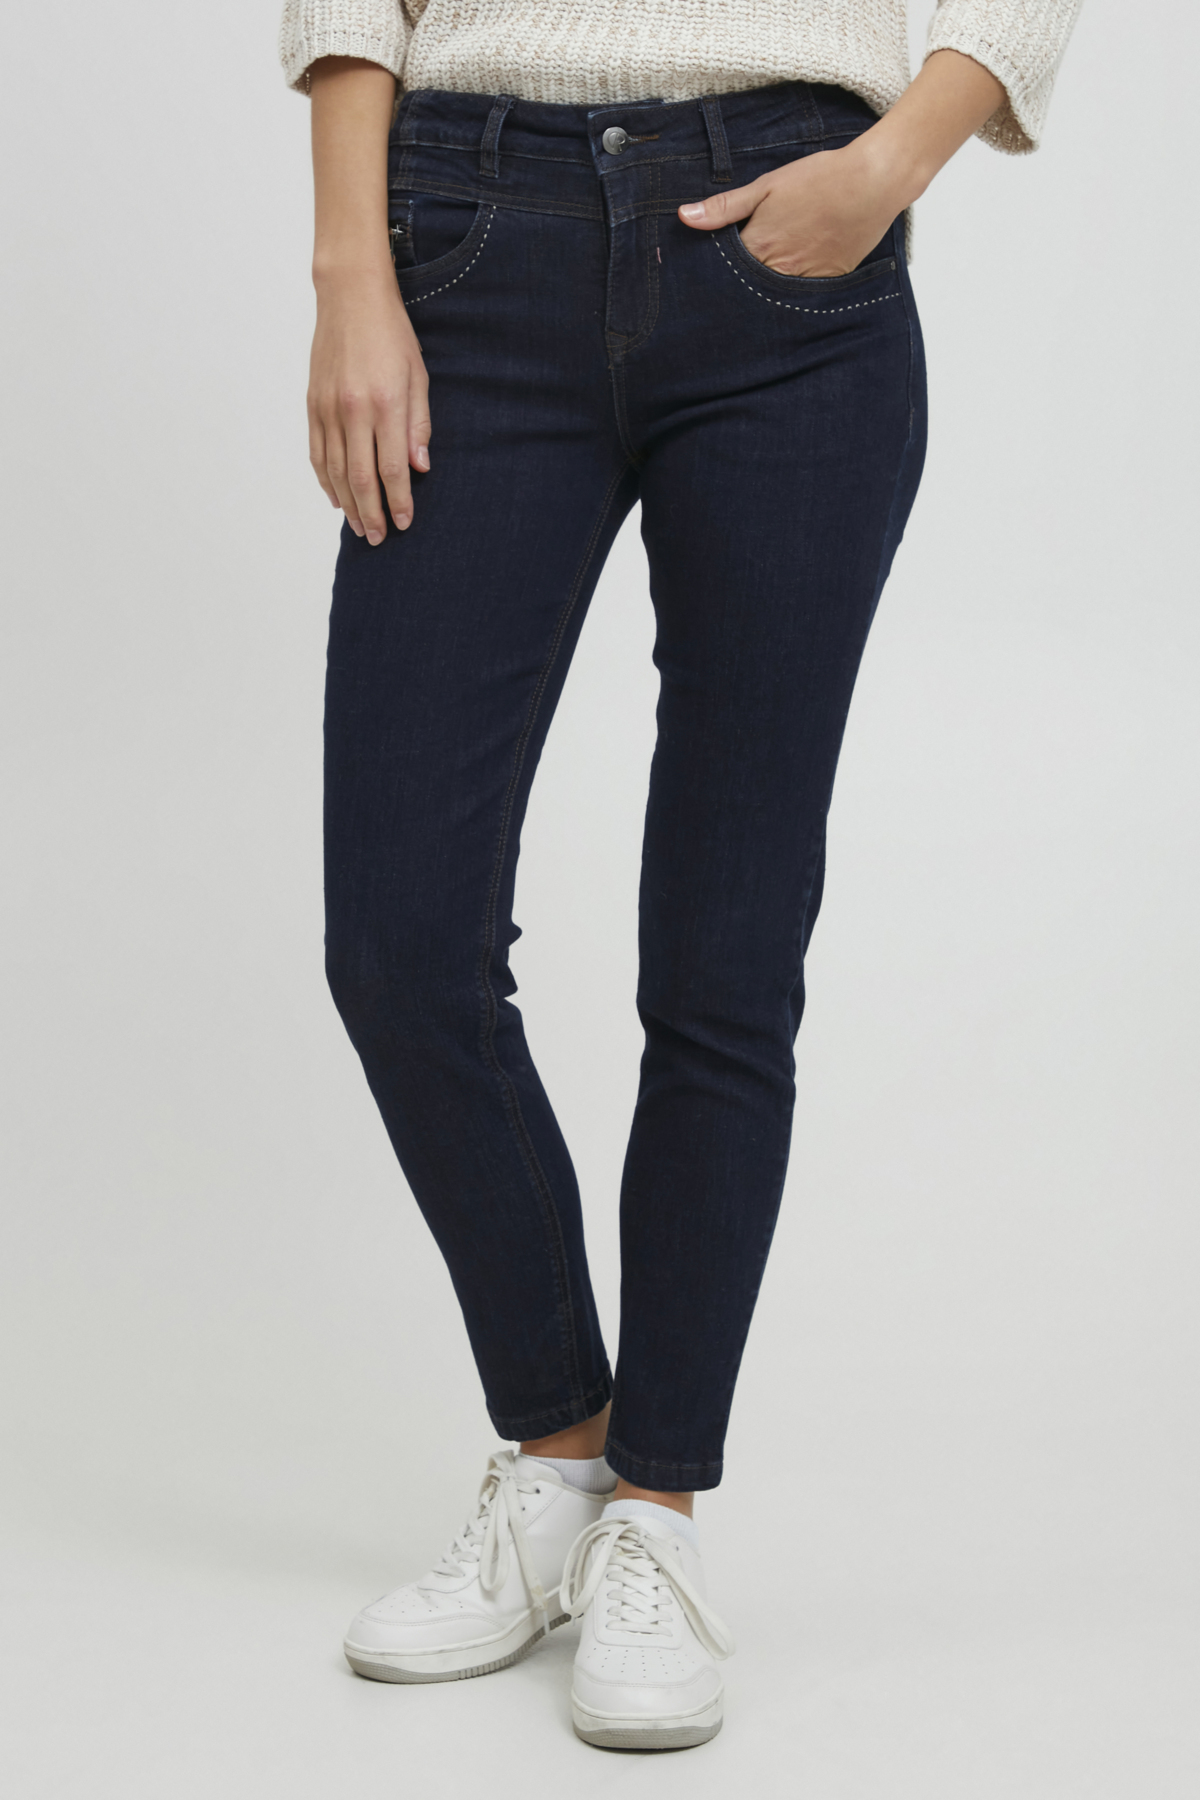 Dranella Drtora Jeans - Jeans - By Haugsted